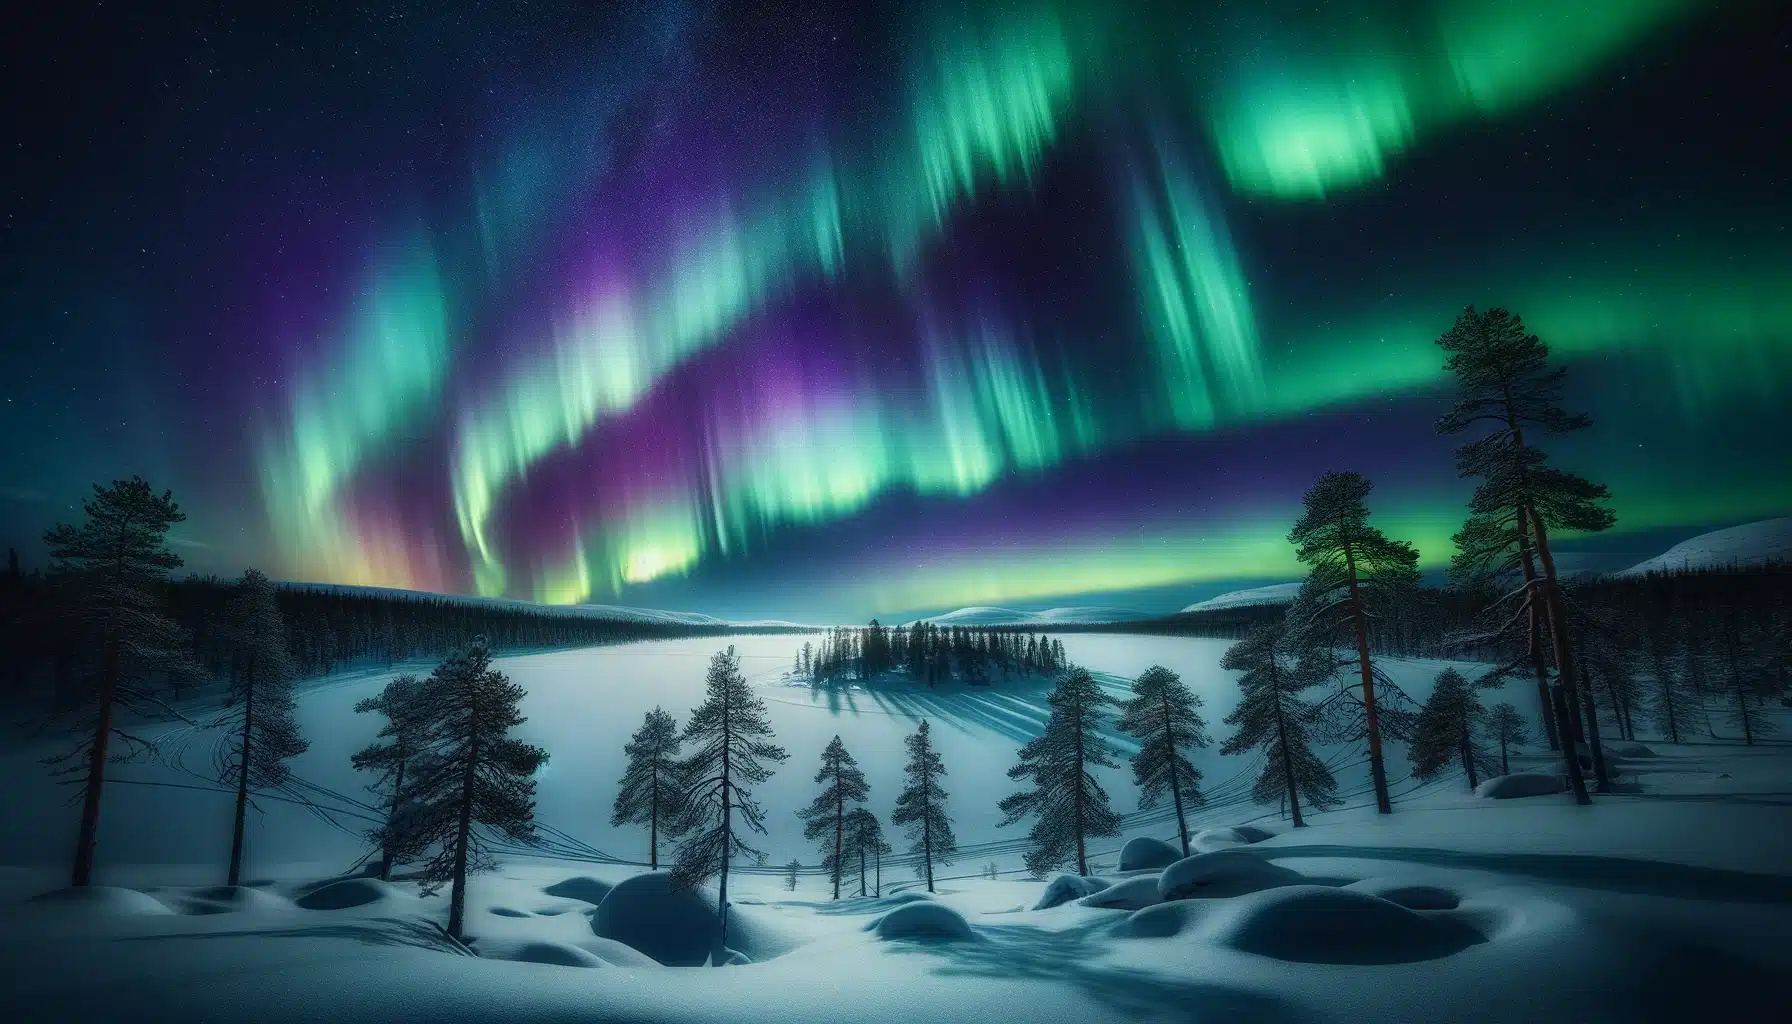 Extensive subjection photograph capturing the Northern Lights over a snowy landscape with pine trees and a frozen lake.